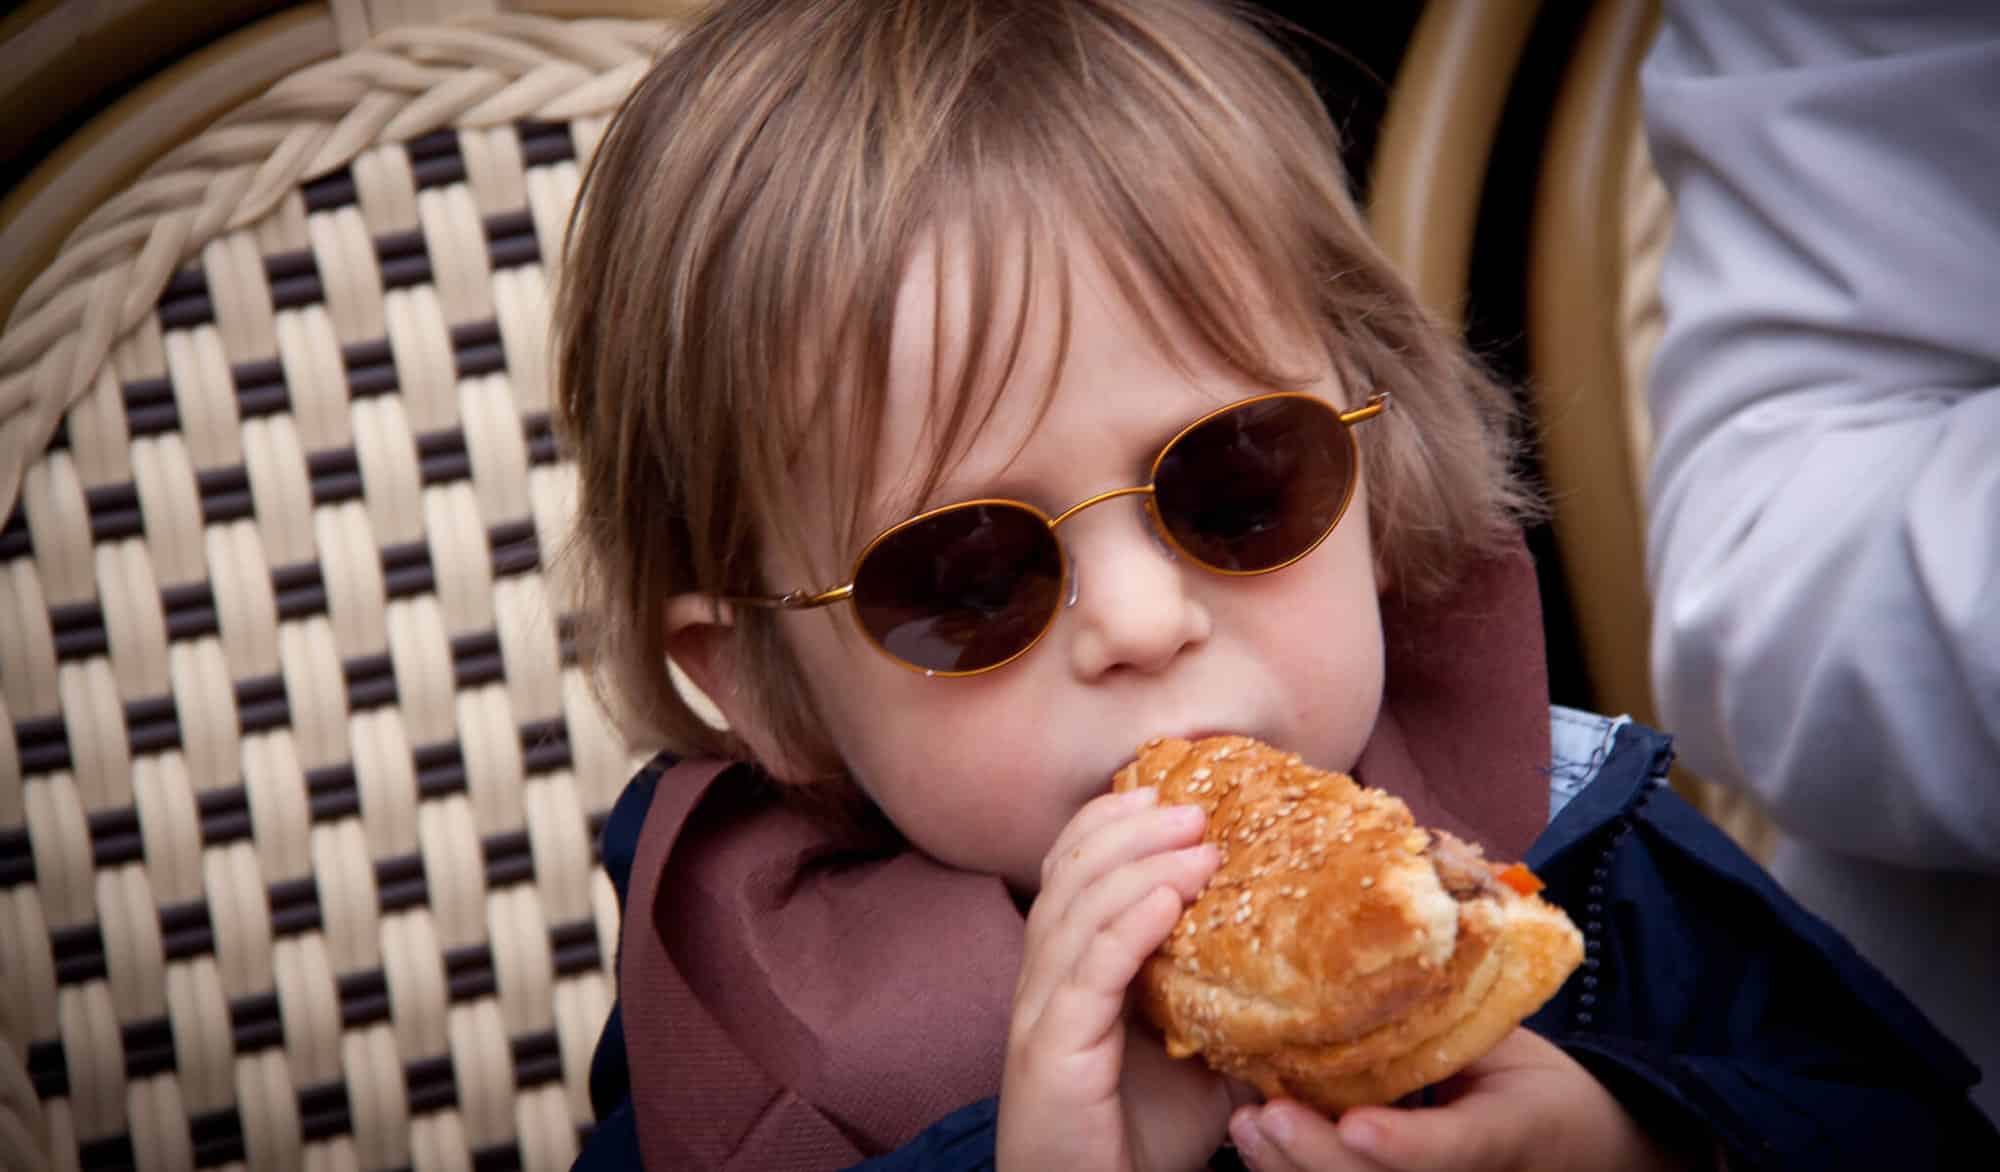 A French kid with golden brown hair and sunglasses takes a bite from a burger he holds with two hands.